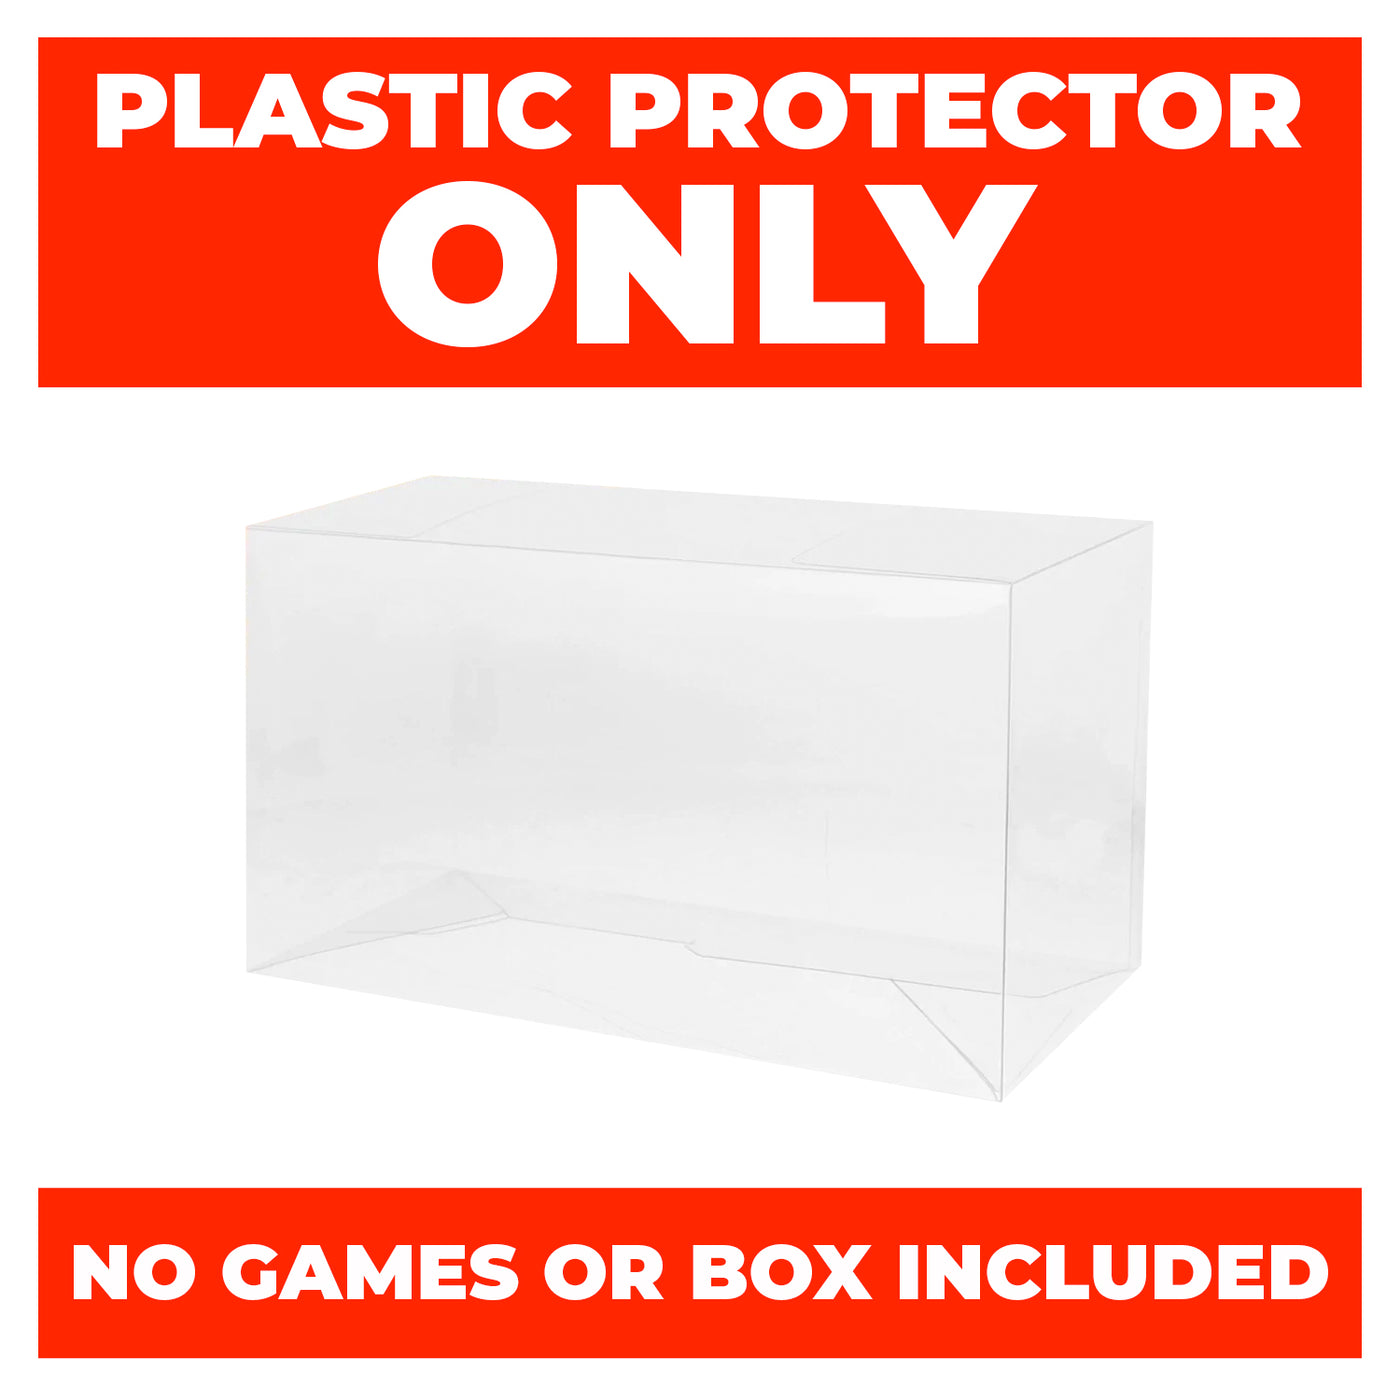 Plastic Protector for NINTENDO 3DS Video Game Console Box 0.50mm thick, UV & Scratch Resistant on The Pop Protector Guide by Display Geek